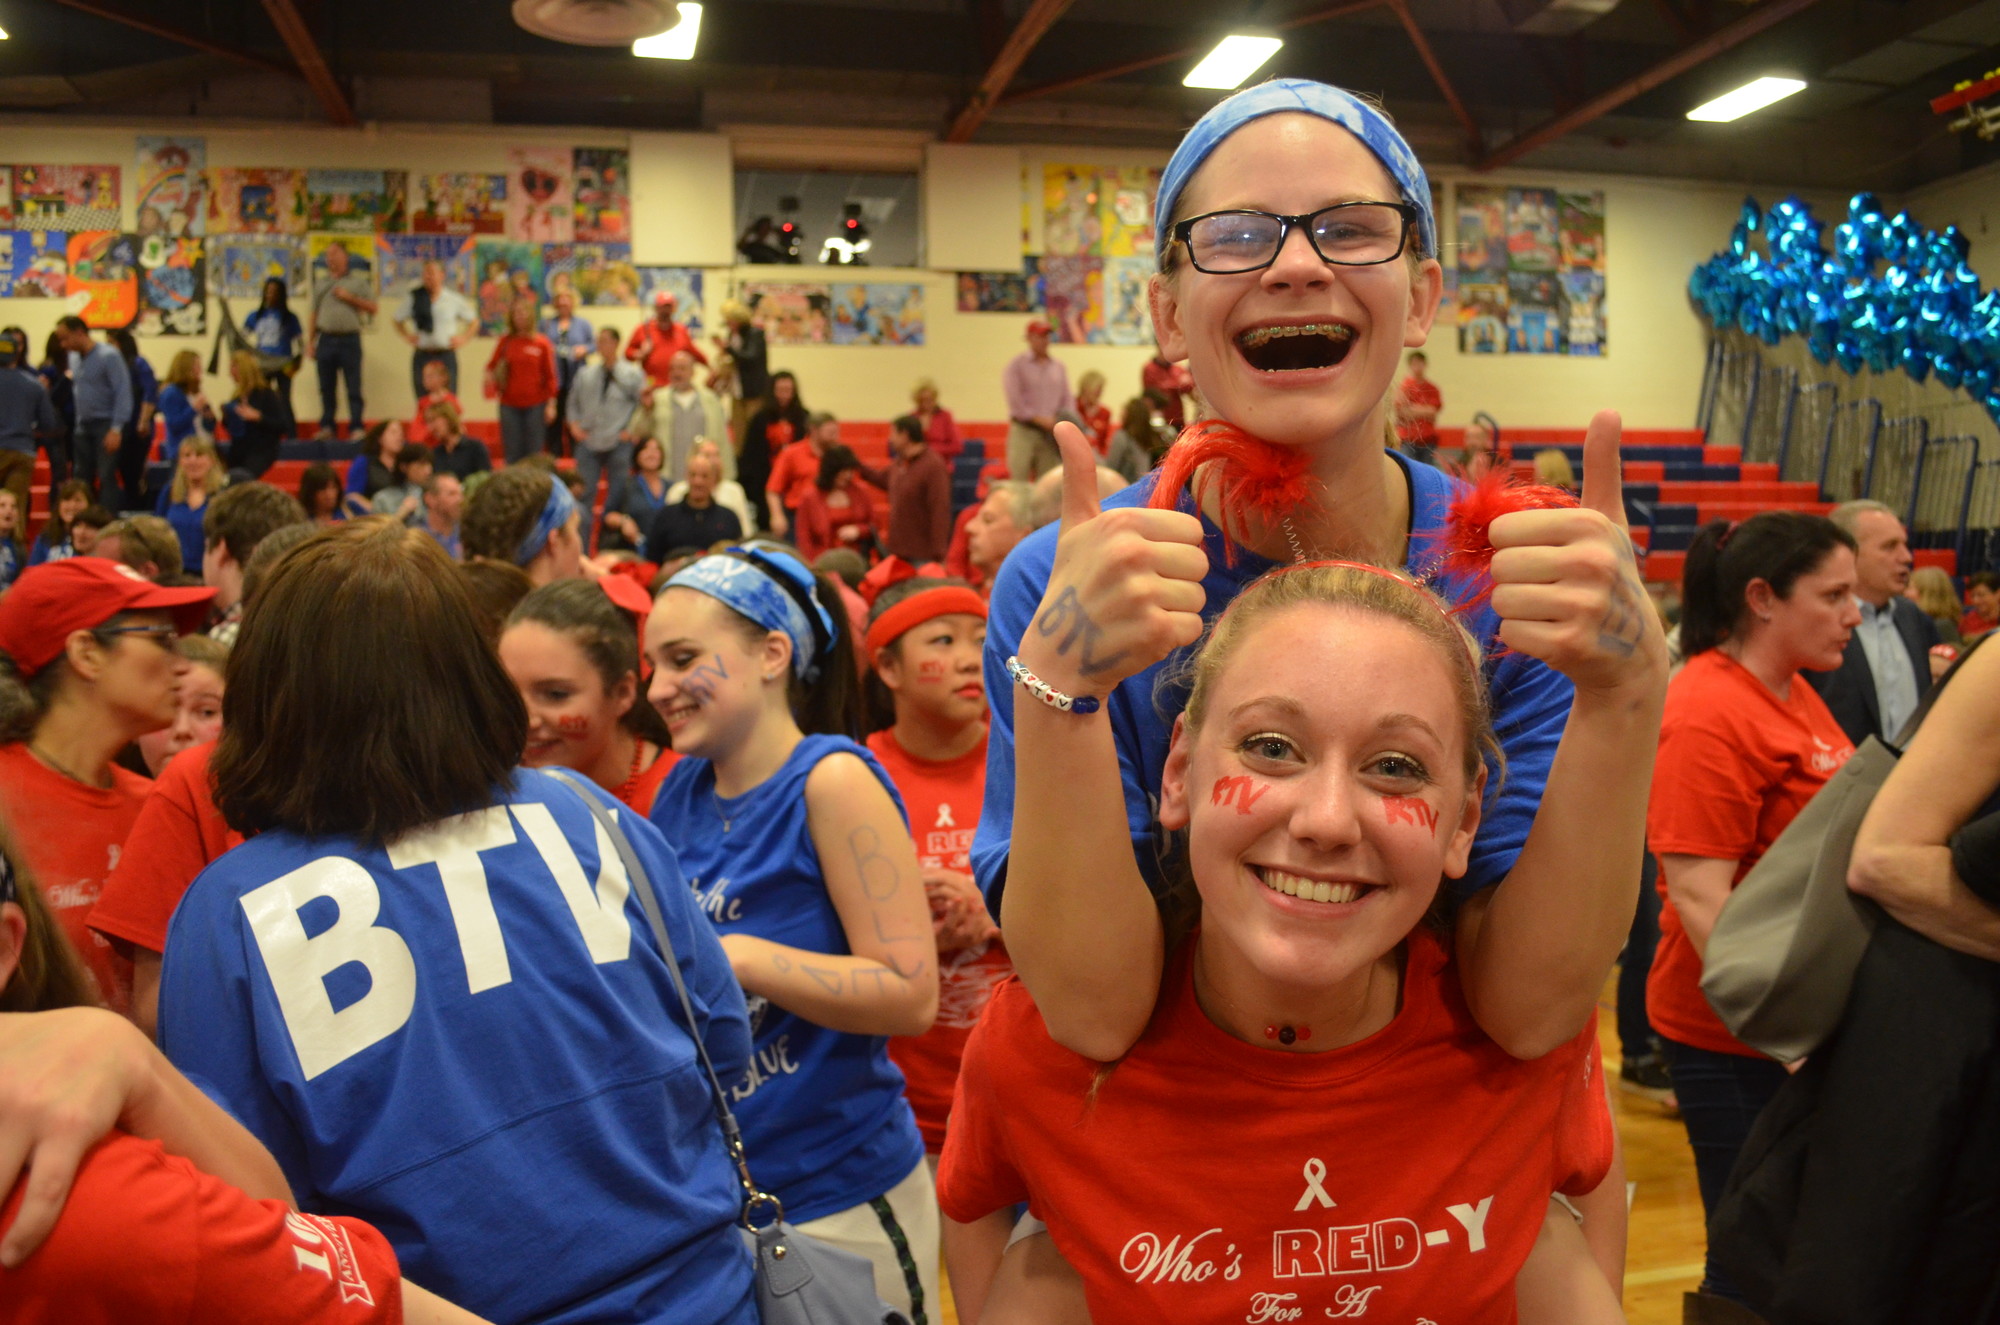 Even though Blue won, Lizzie Hefner and Grace Horcher celebrated together after the results were announced.